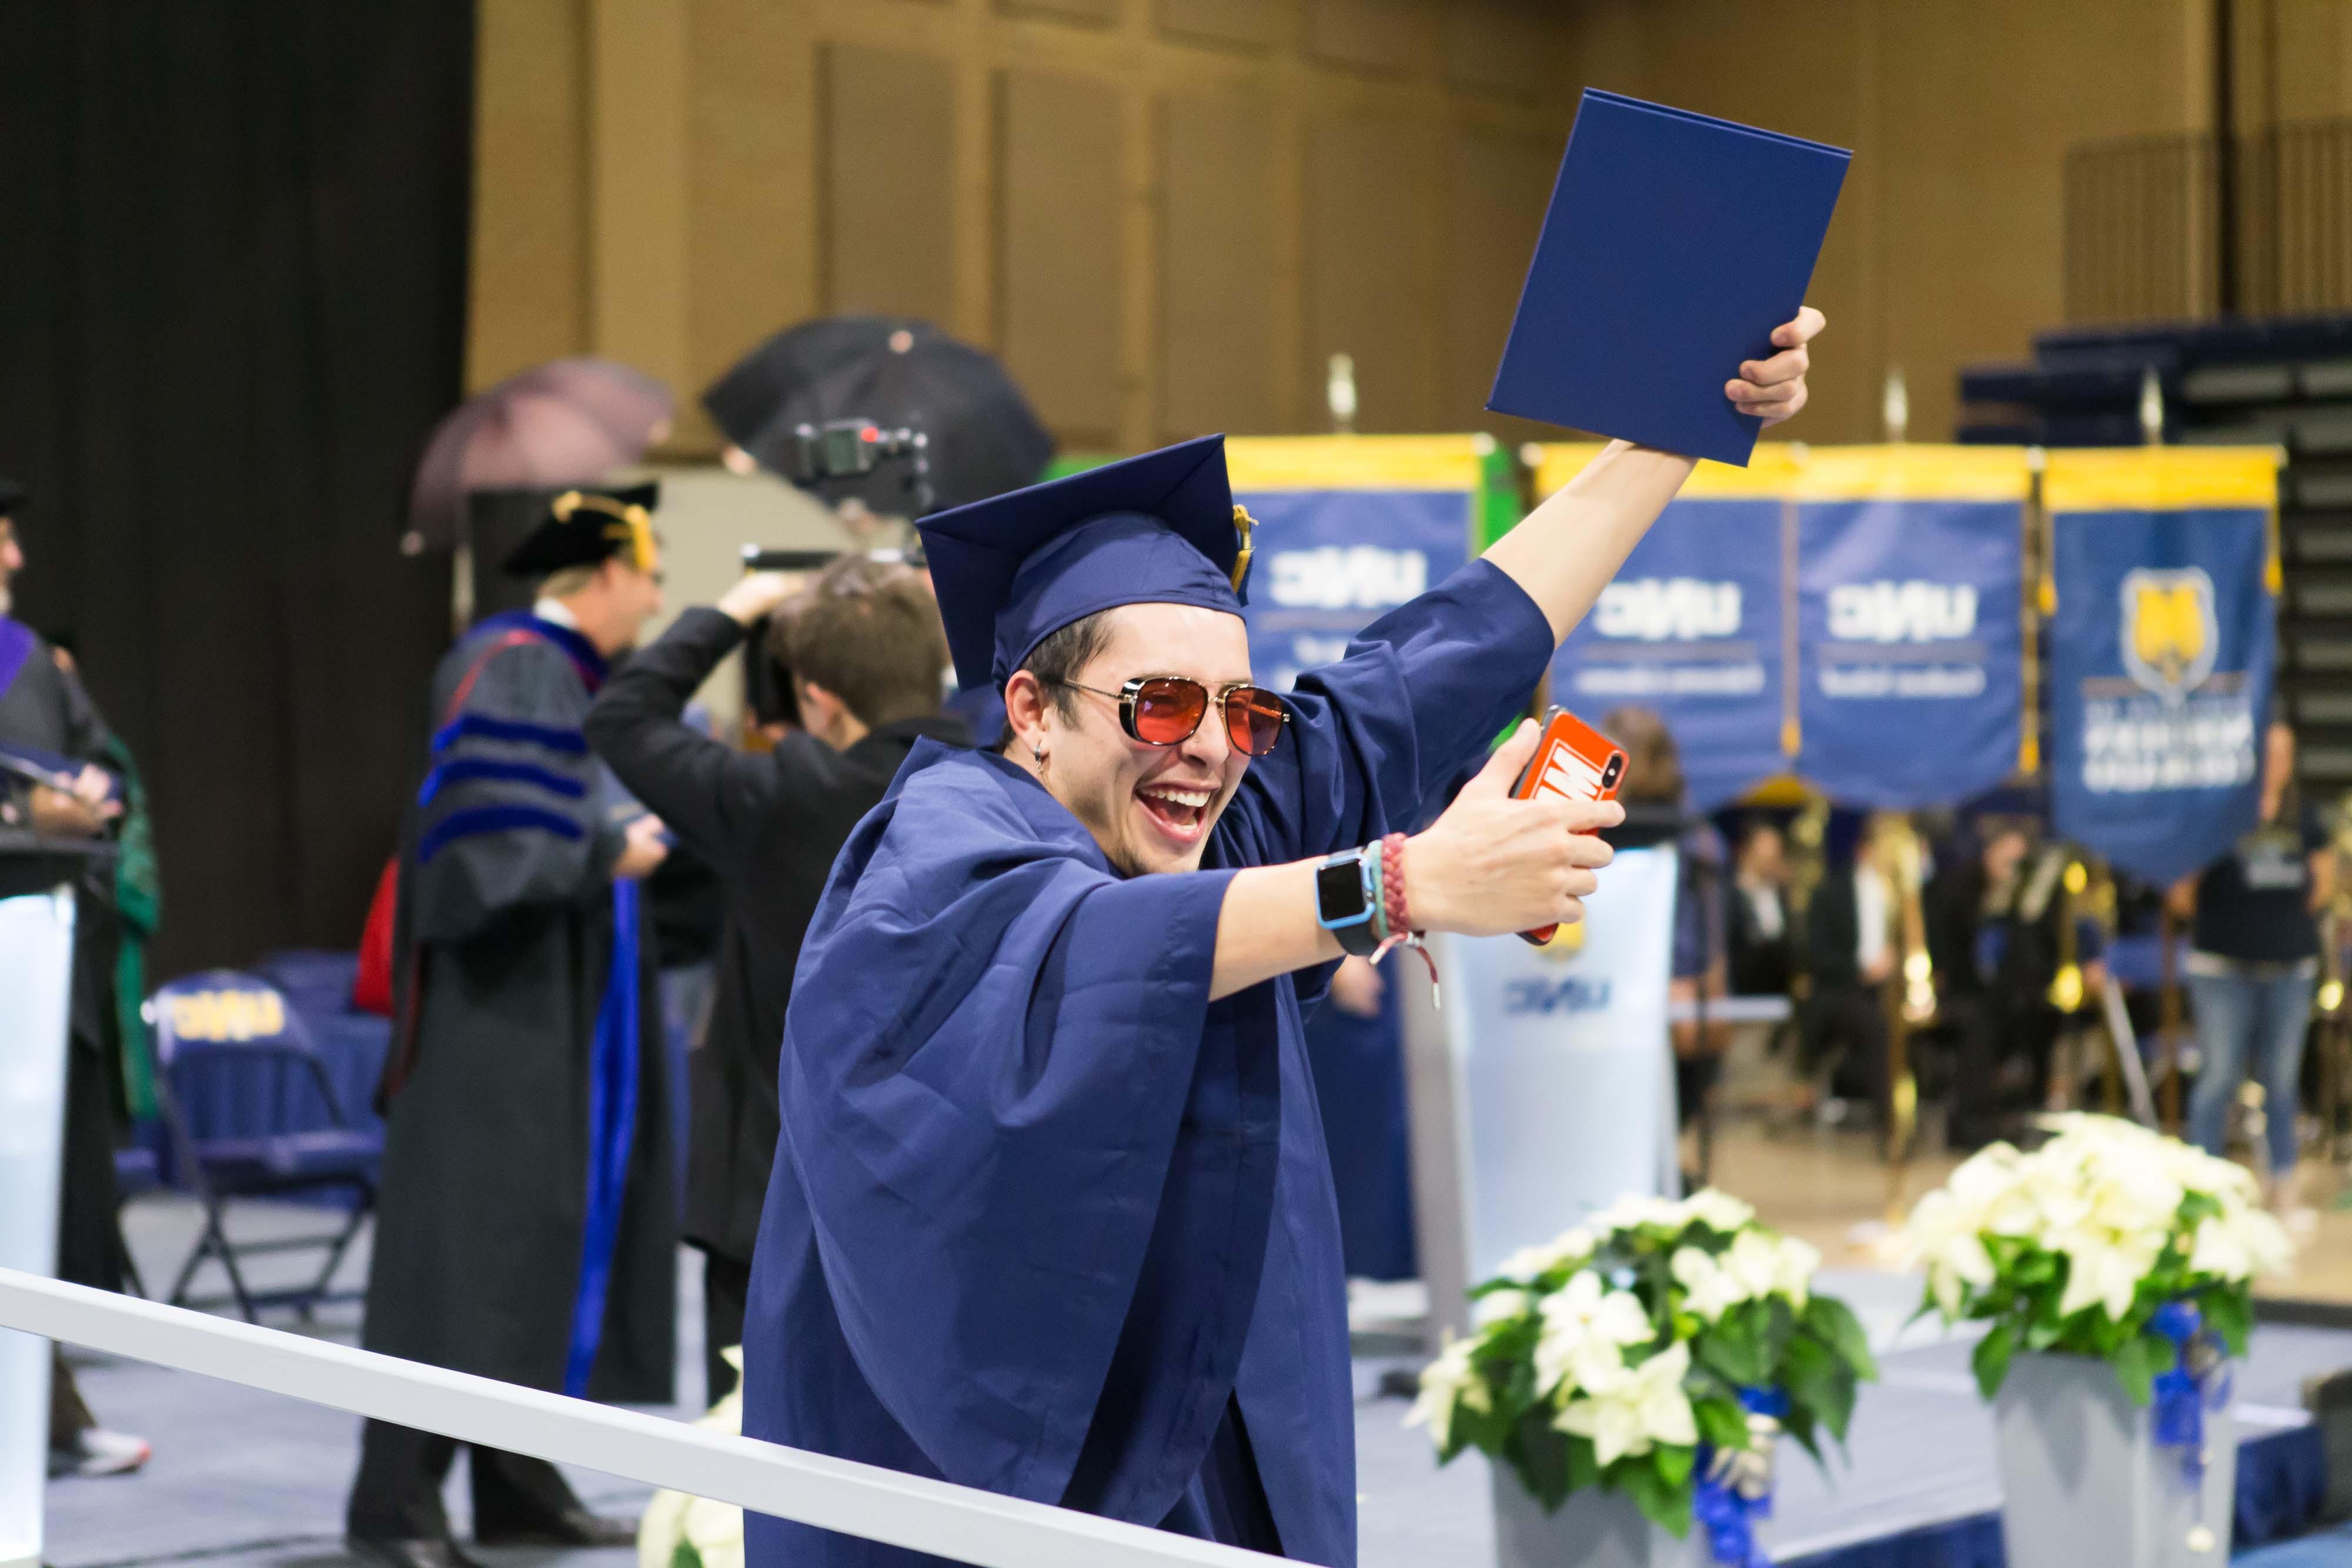 Student takes selfie with diploma